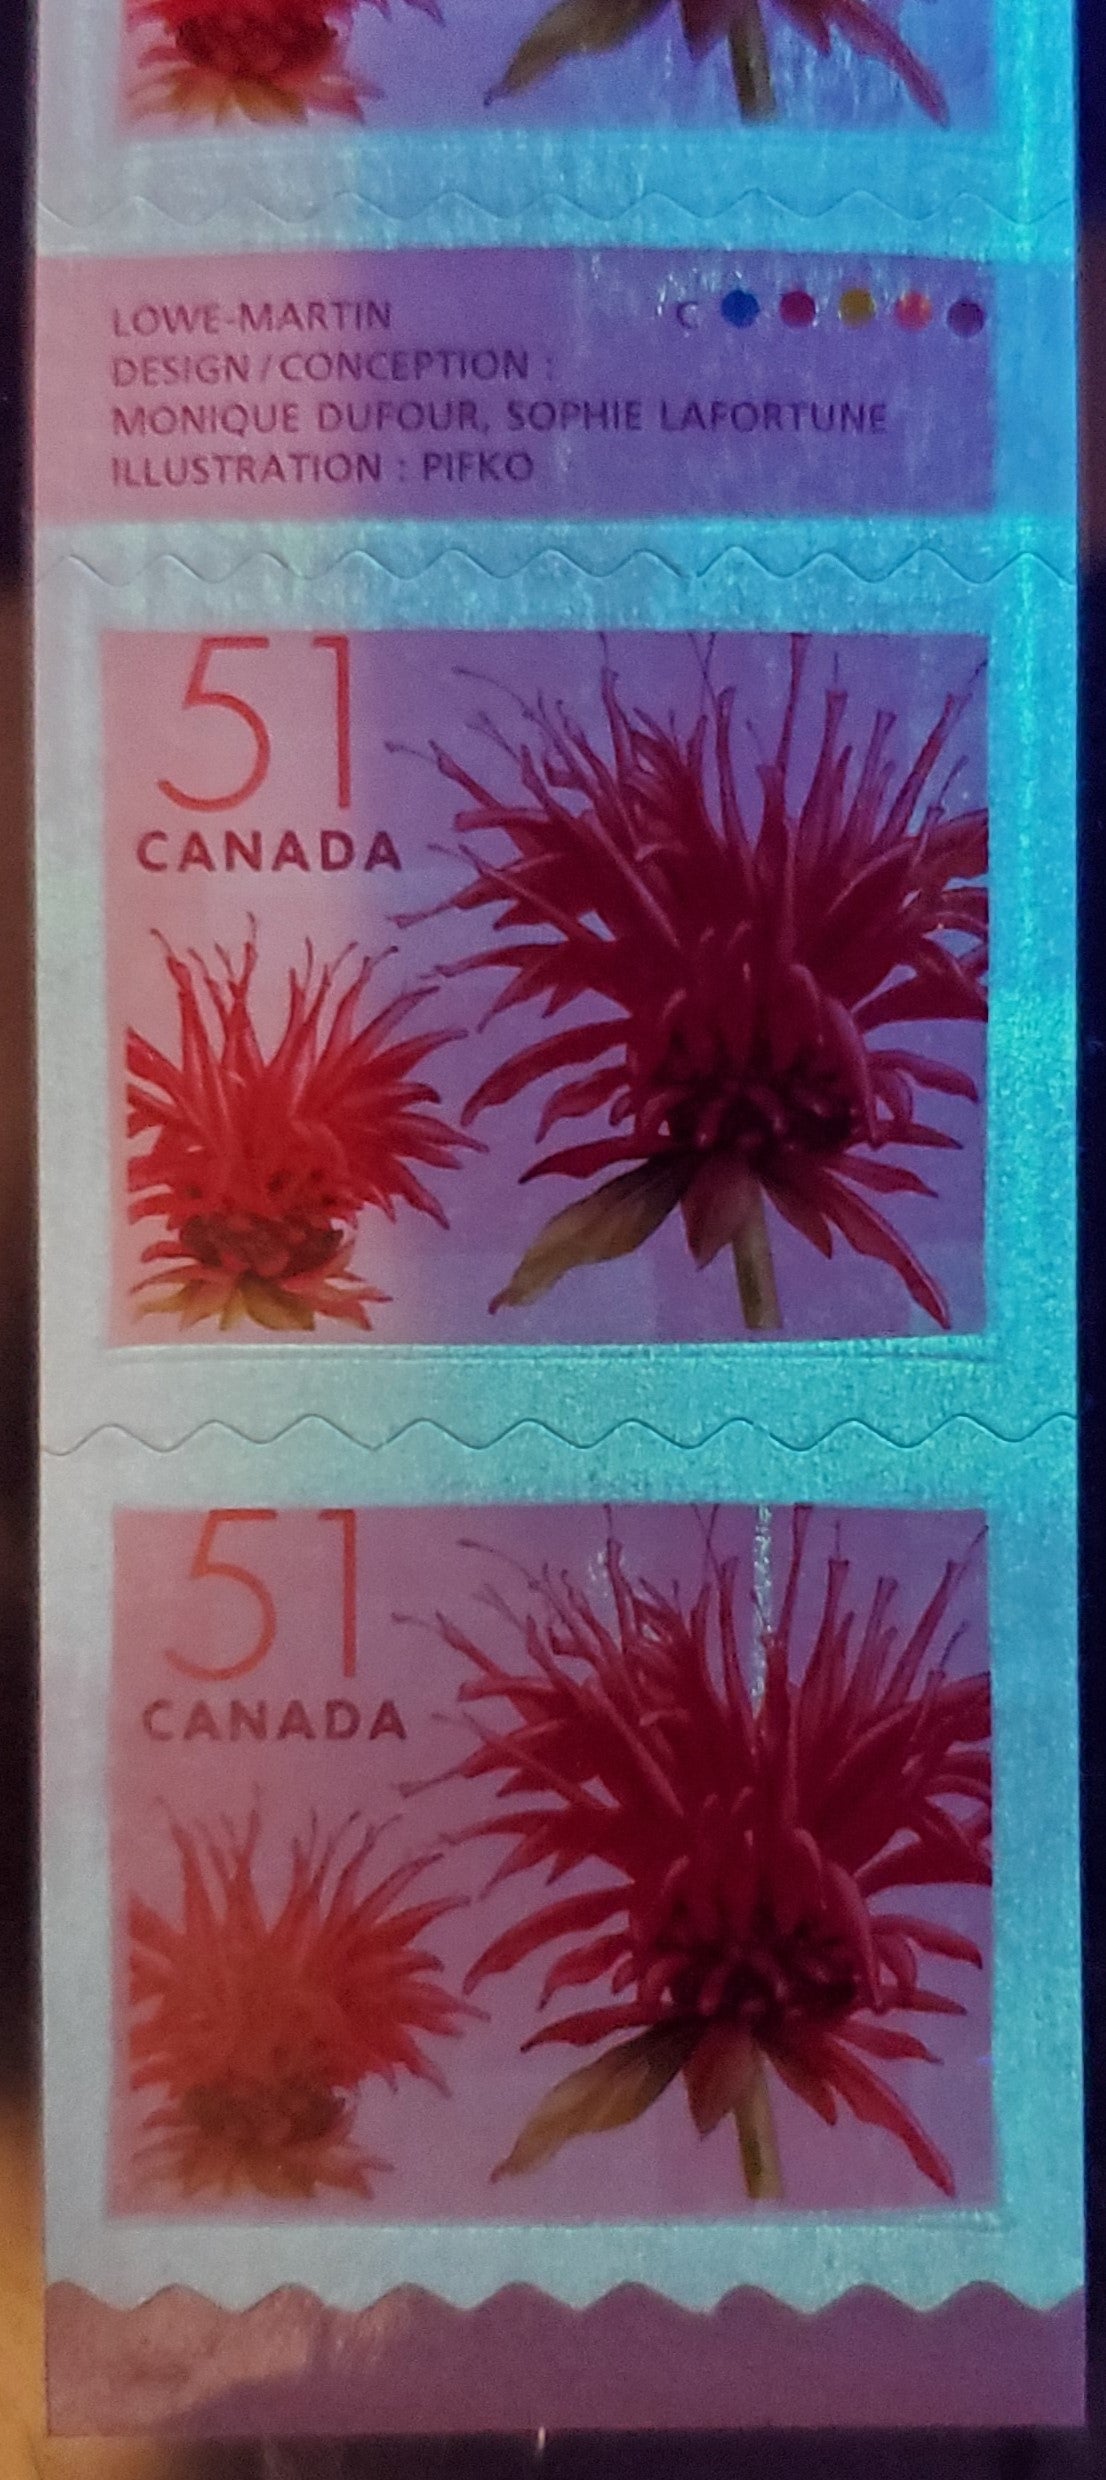 Lot 40 Canada #2128ii 51c Multicolored Red Bergamot, 2005-2006 Flower Definitives (2) - Coils, A VFNH Gutter Strip Of 4 On DF TRC Paper With Pale Washed Out Tagging, Showing Streak Into Last Stamp $15